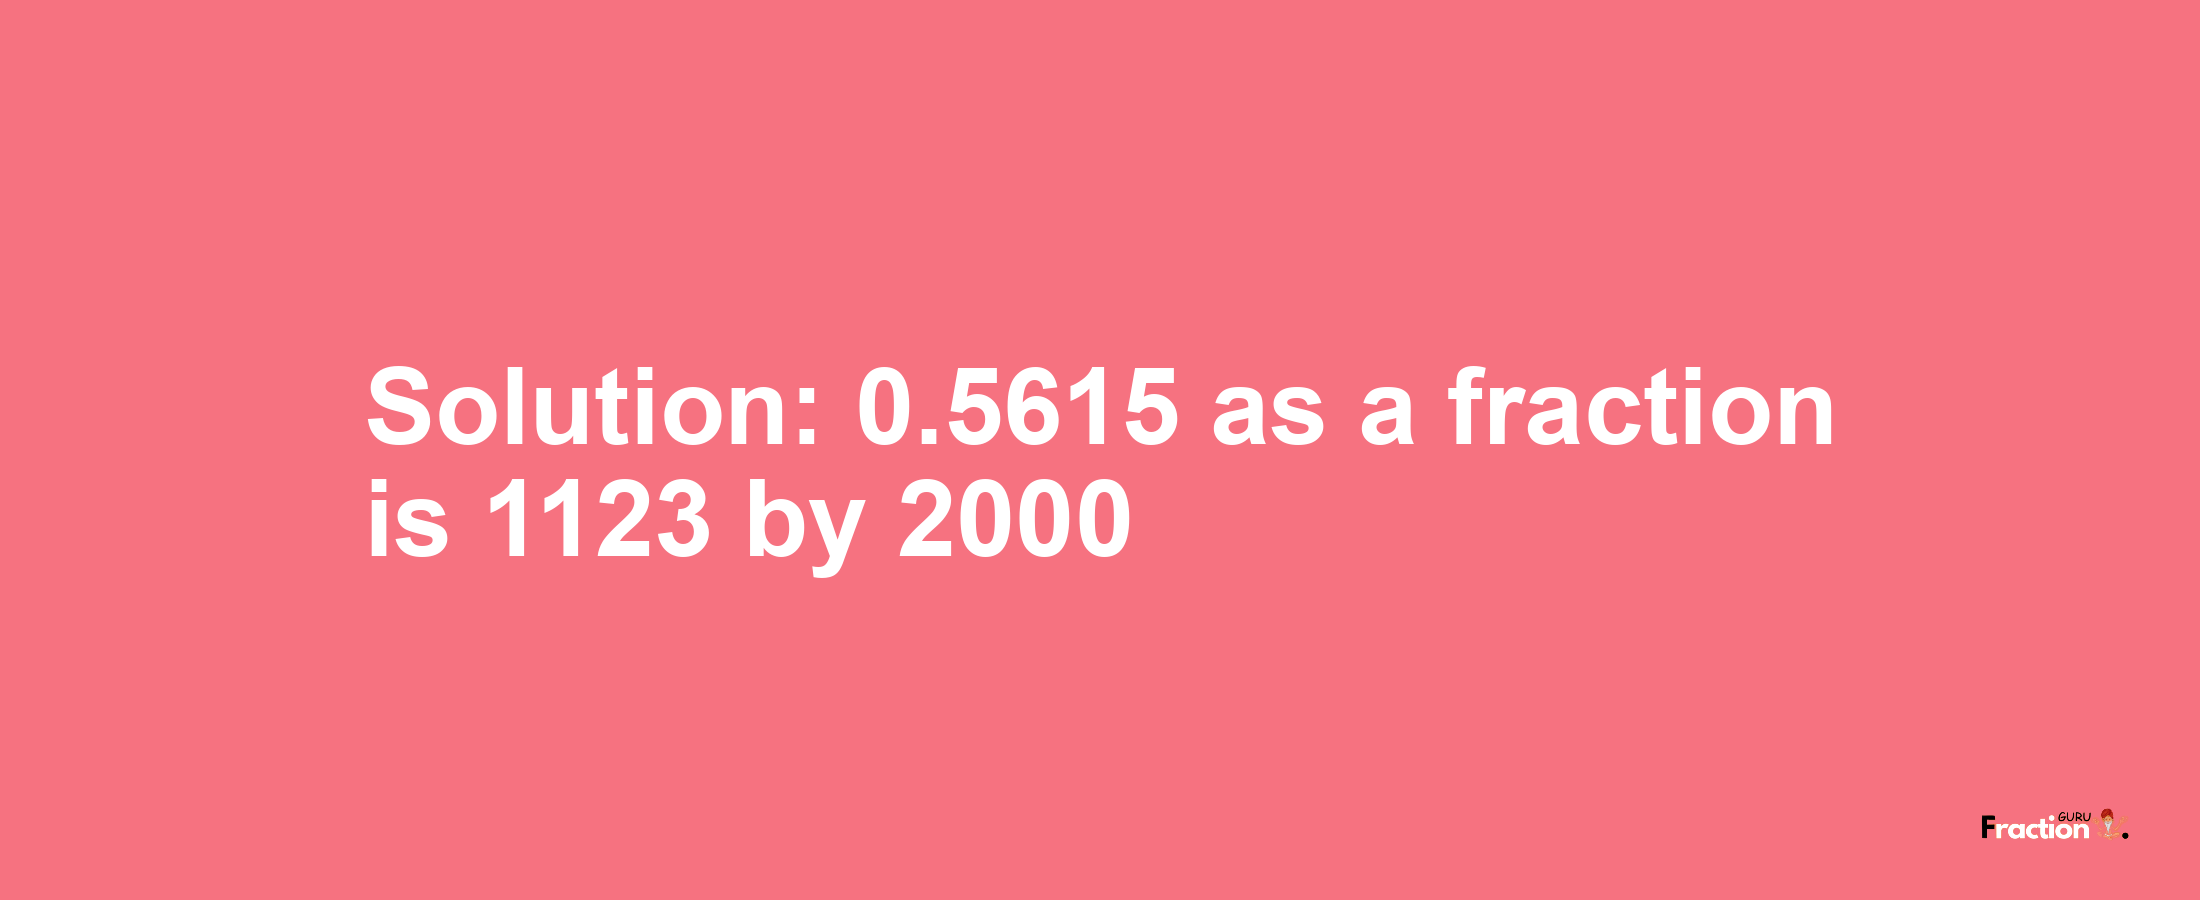 Solution:0.5615 as a fraction is 1123/2000